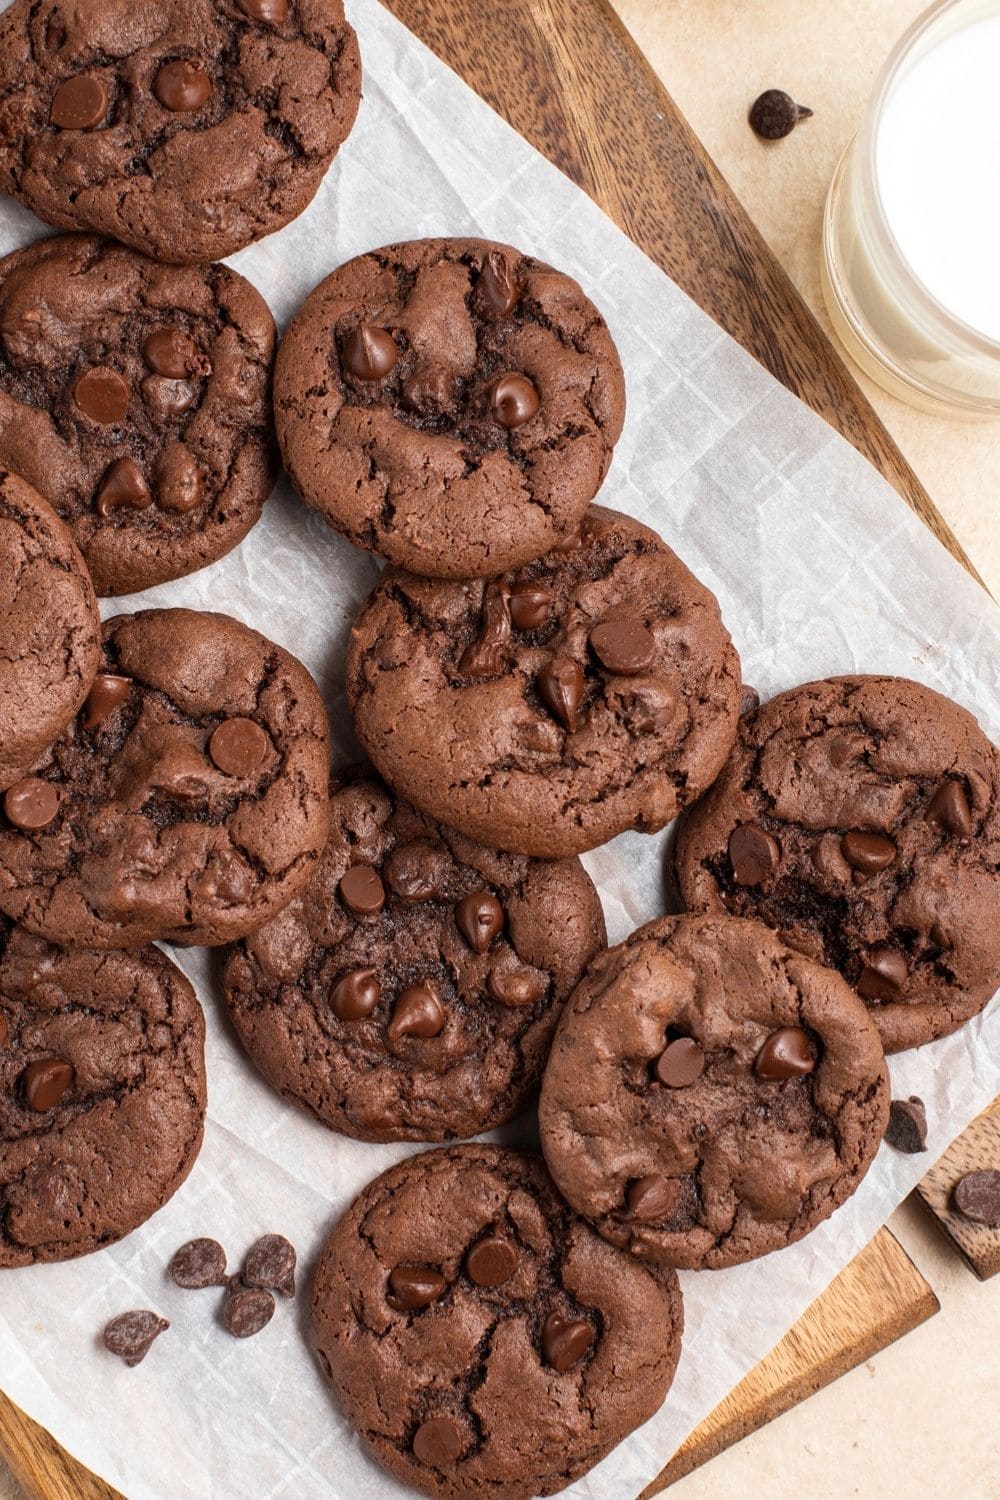 Chocolate Cake Mix Cookies Recipe (So Easy!) featuring Chocolate Cake Mix Cookies  on Parchment with a Glass of Milk